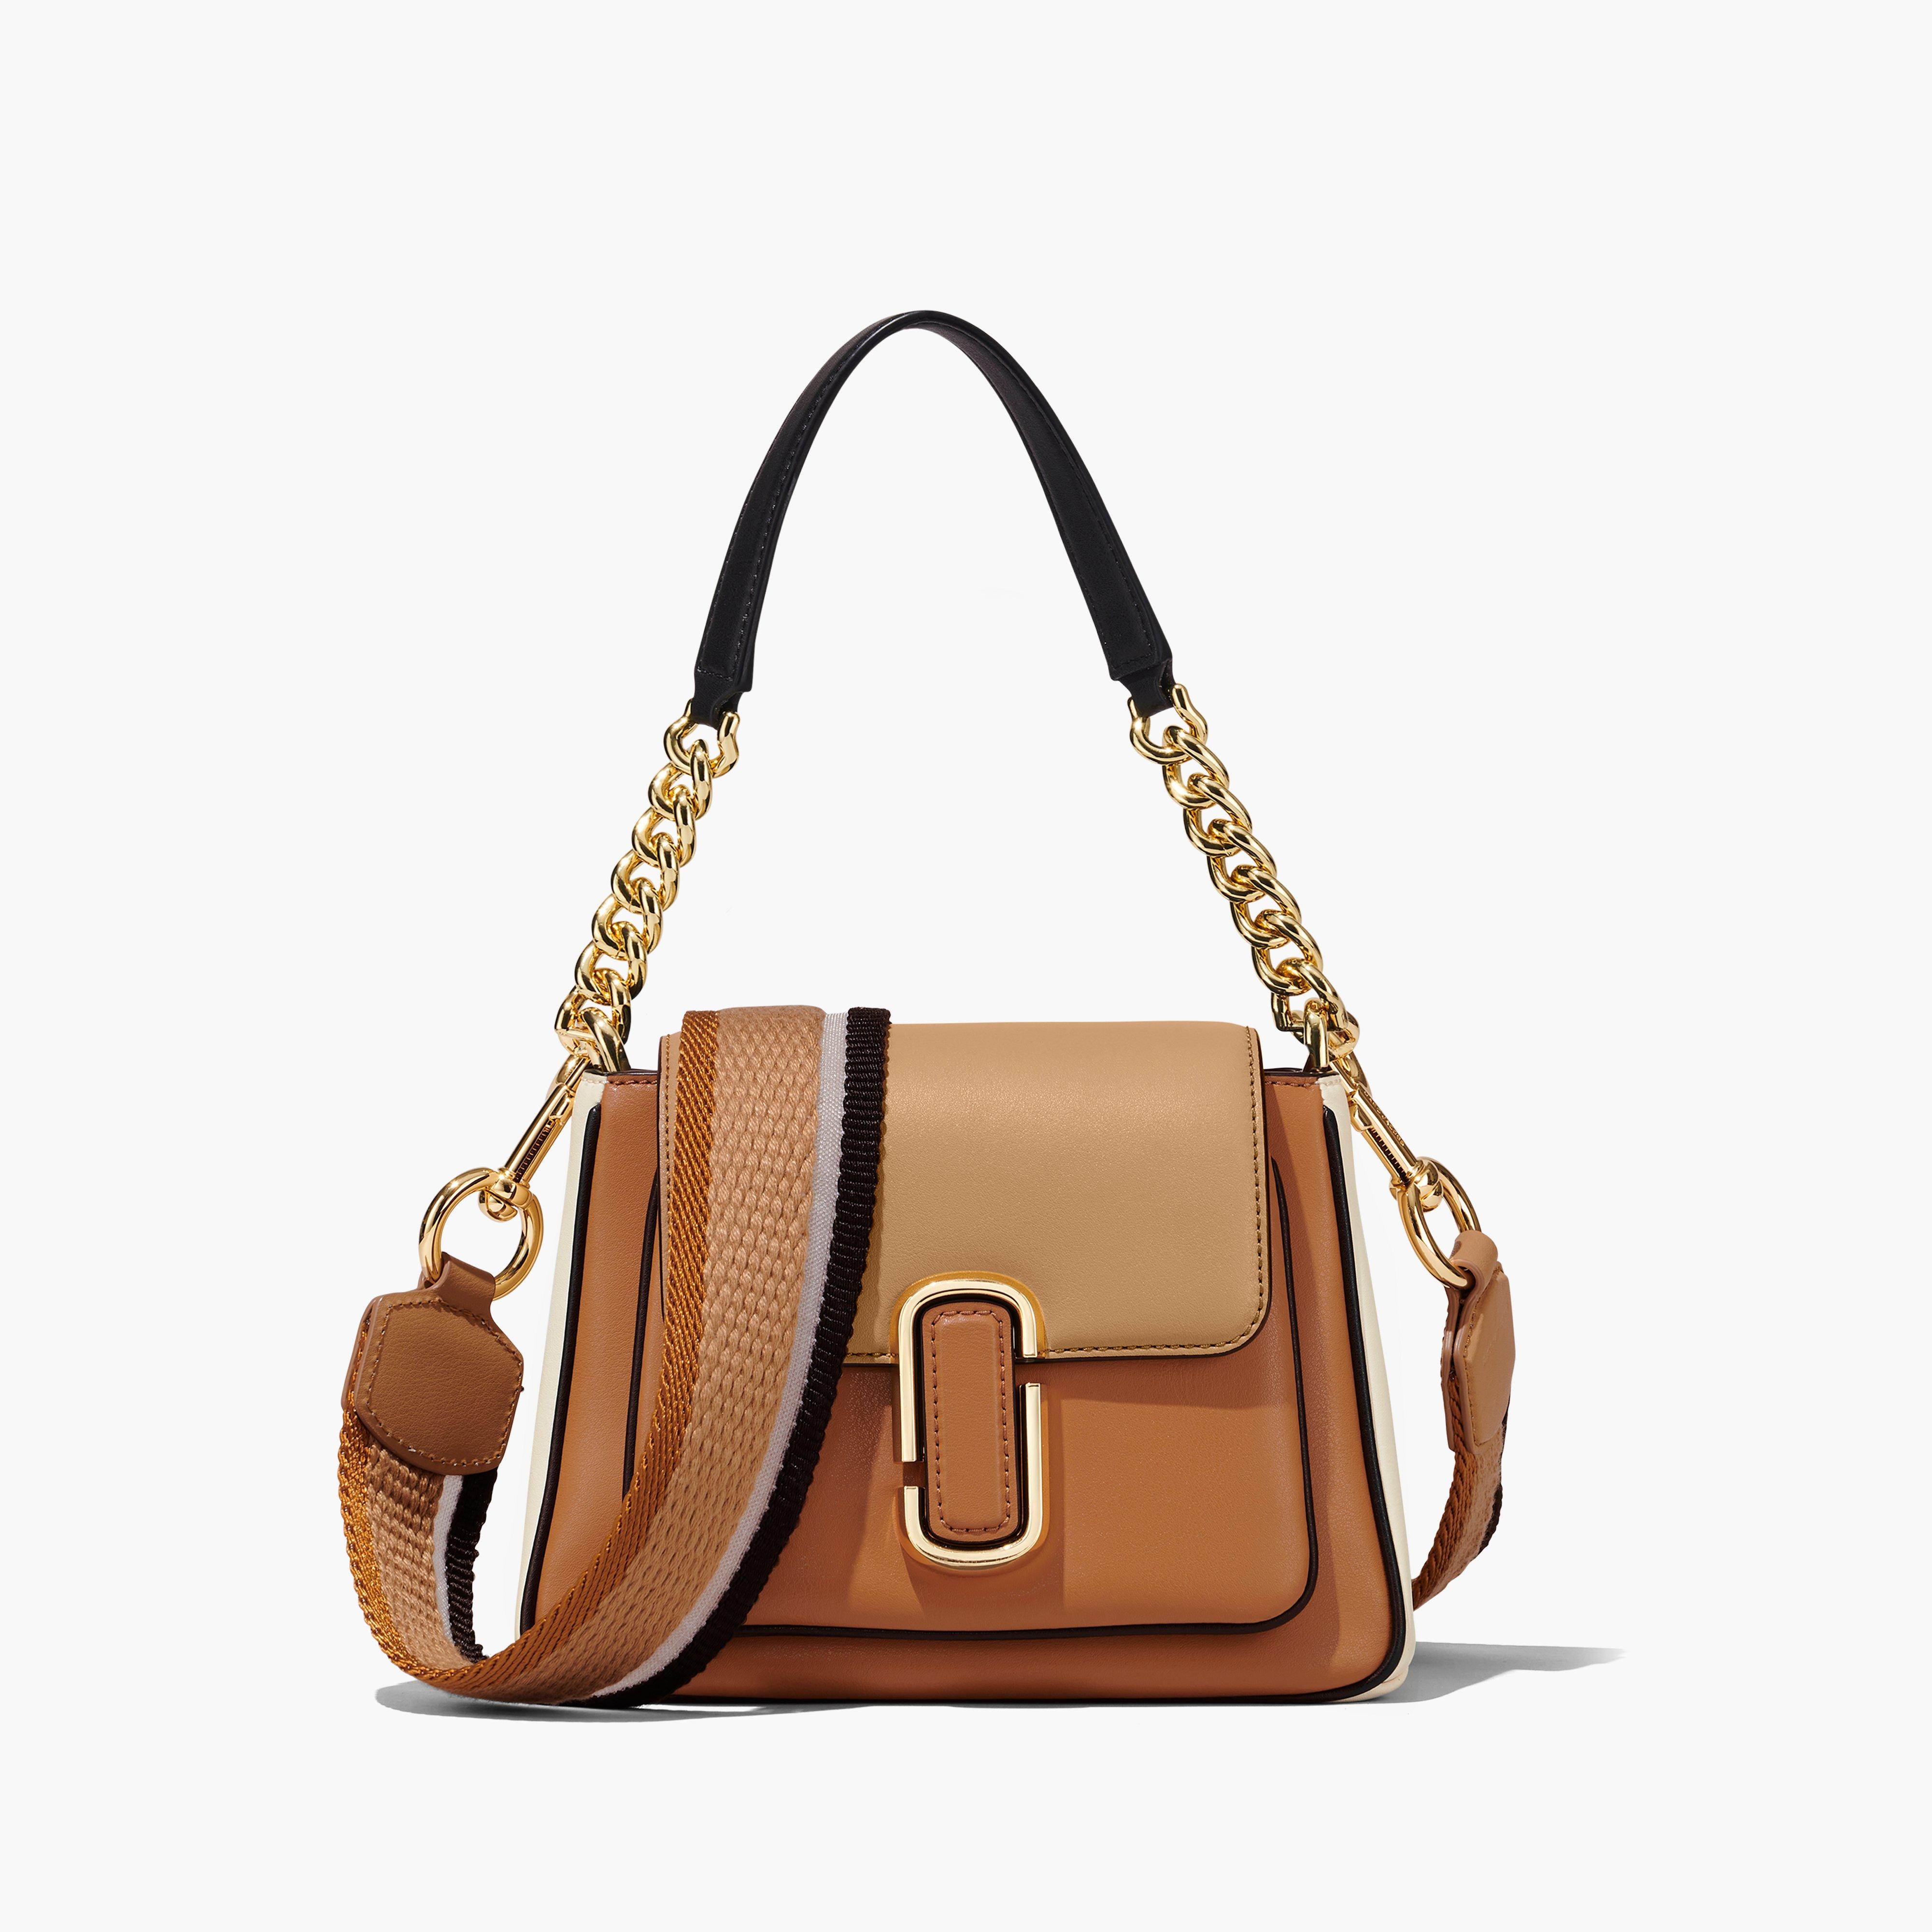 Marc by Marc jacobs The Colorblock J Marc Chain Mini Satchel,CATHAY SPICE MULTI